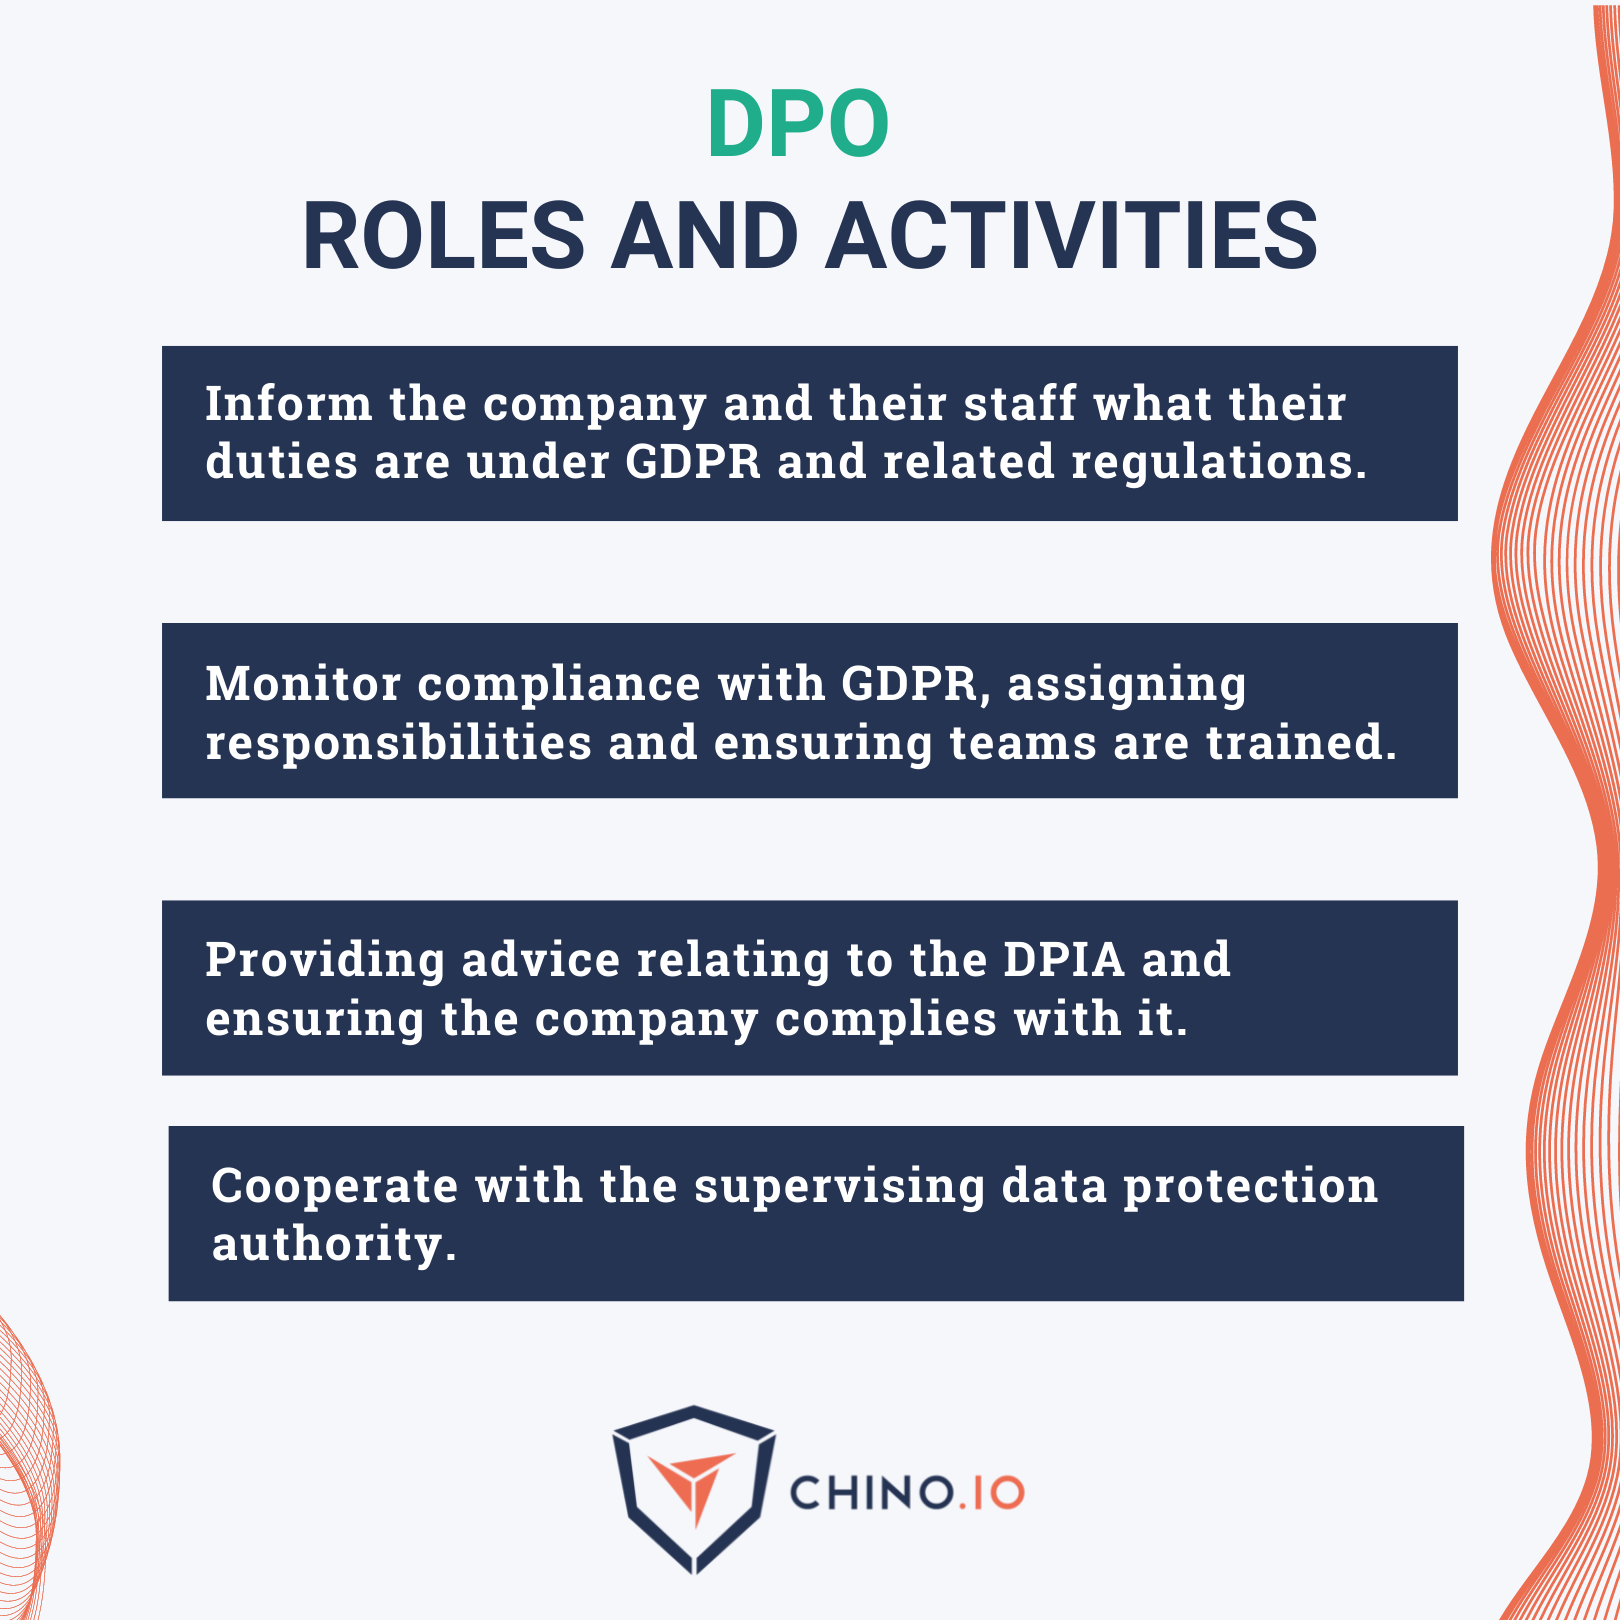 4 boxes that explains the DPO role and activities